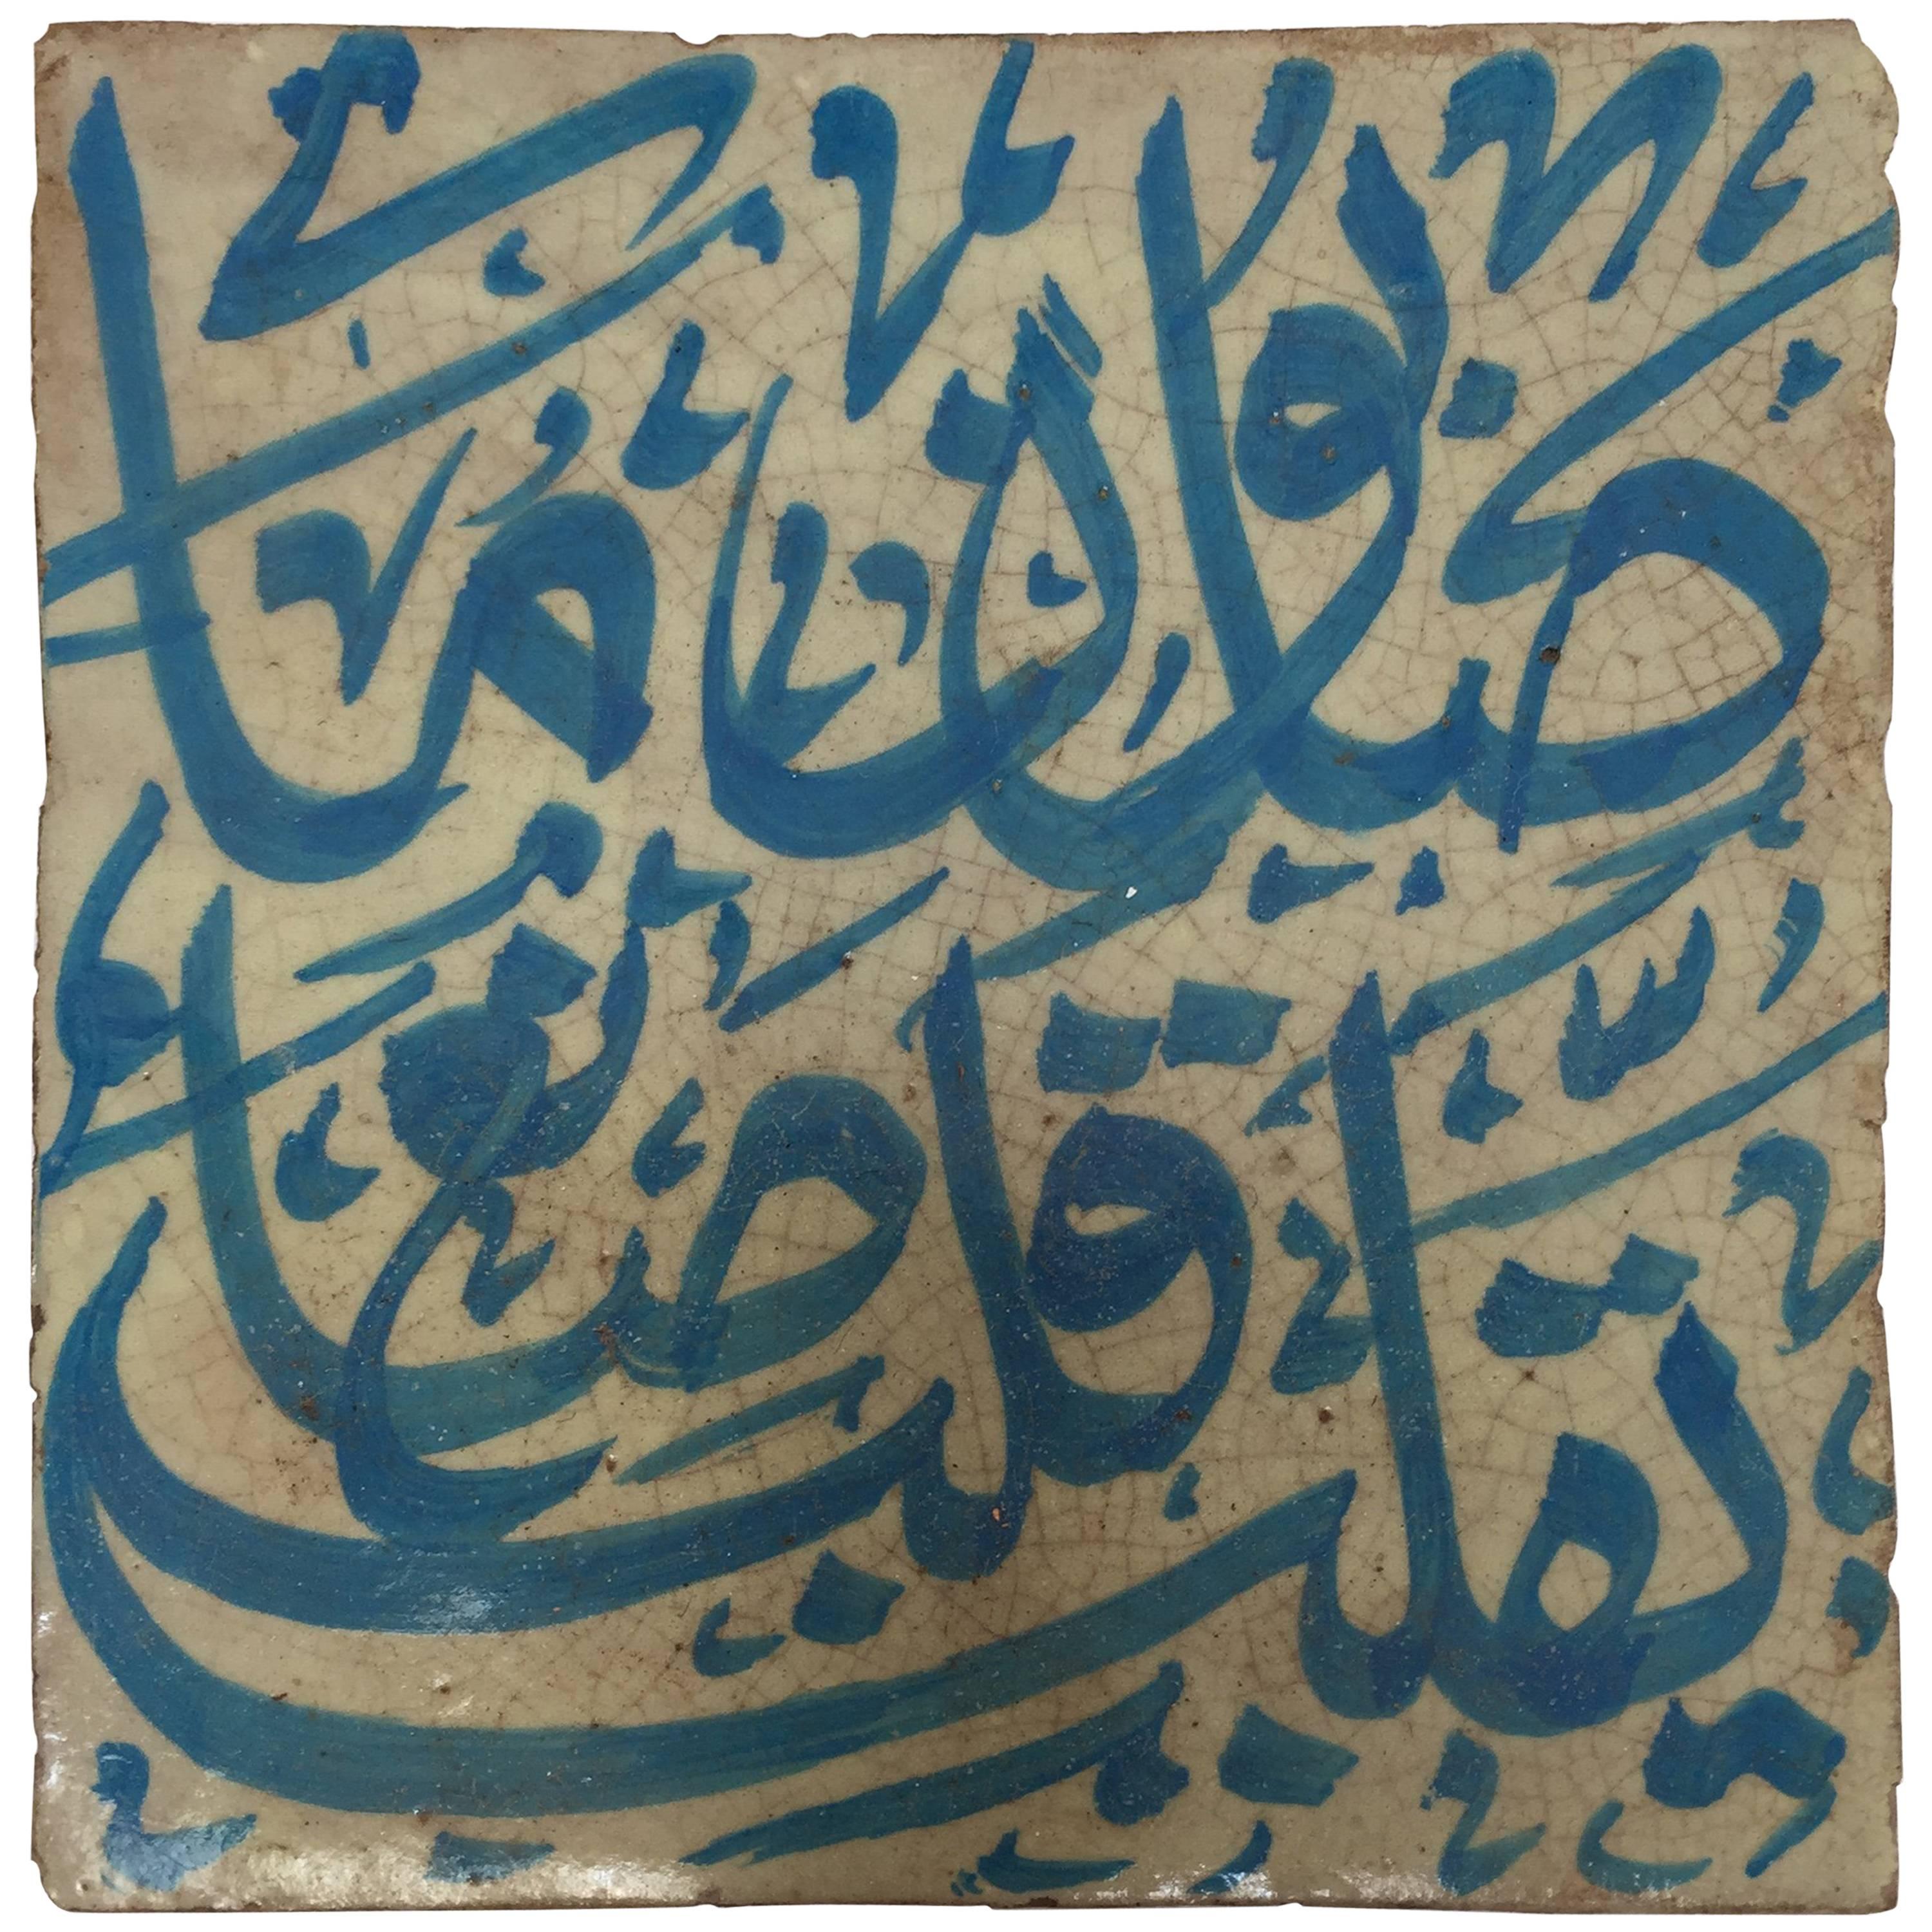 Moroccan Ceramic Tile with Arabic Writing